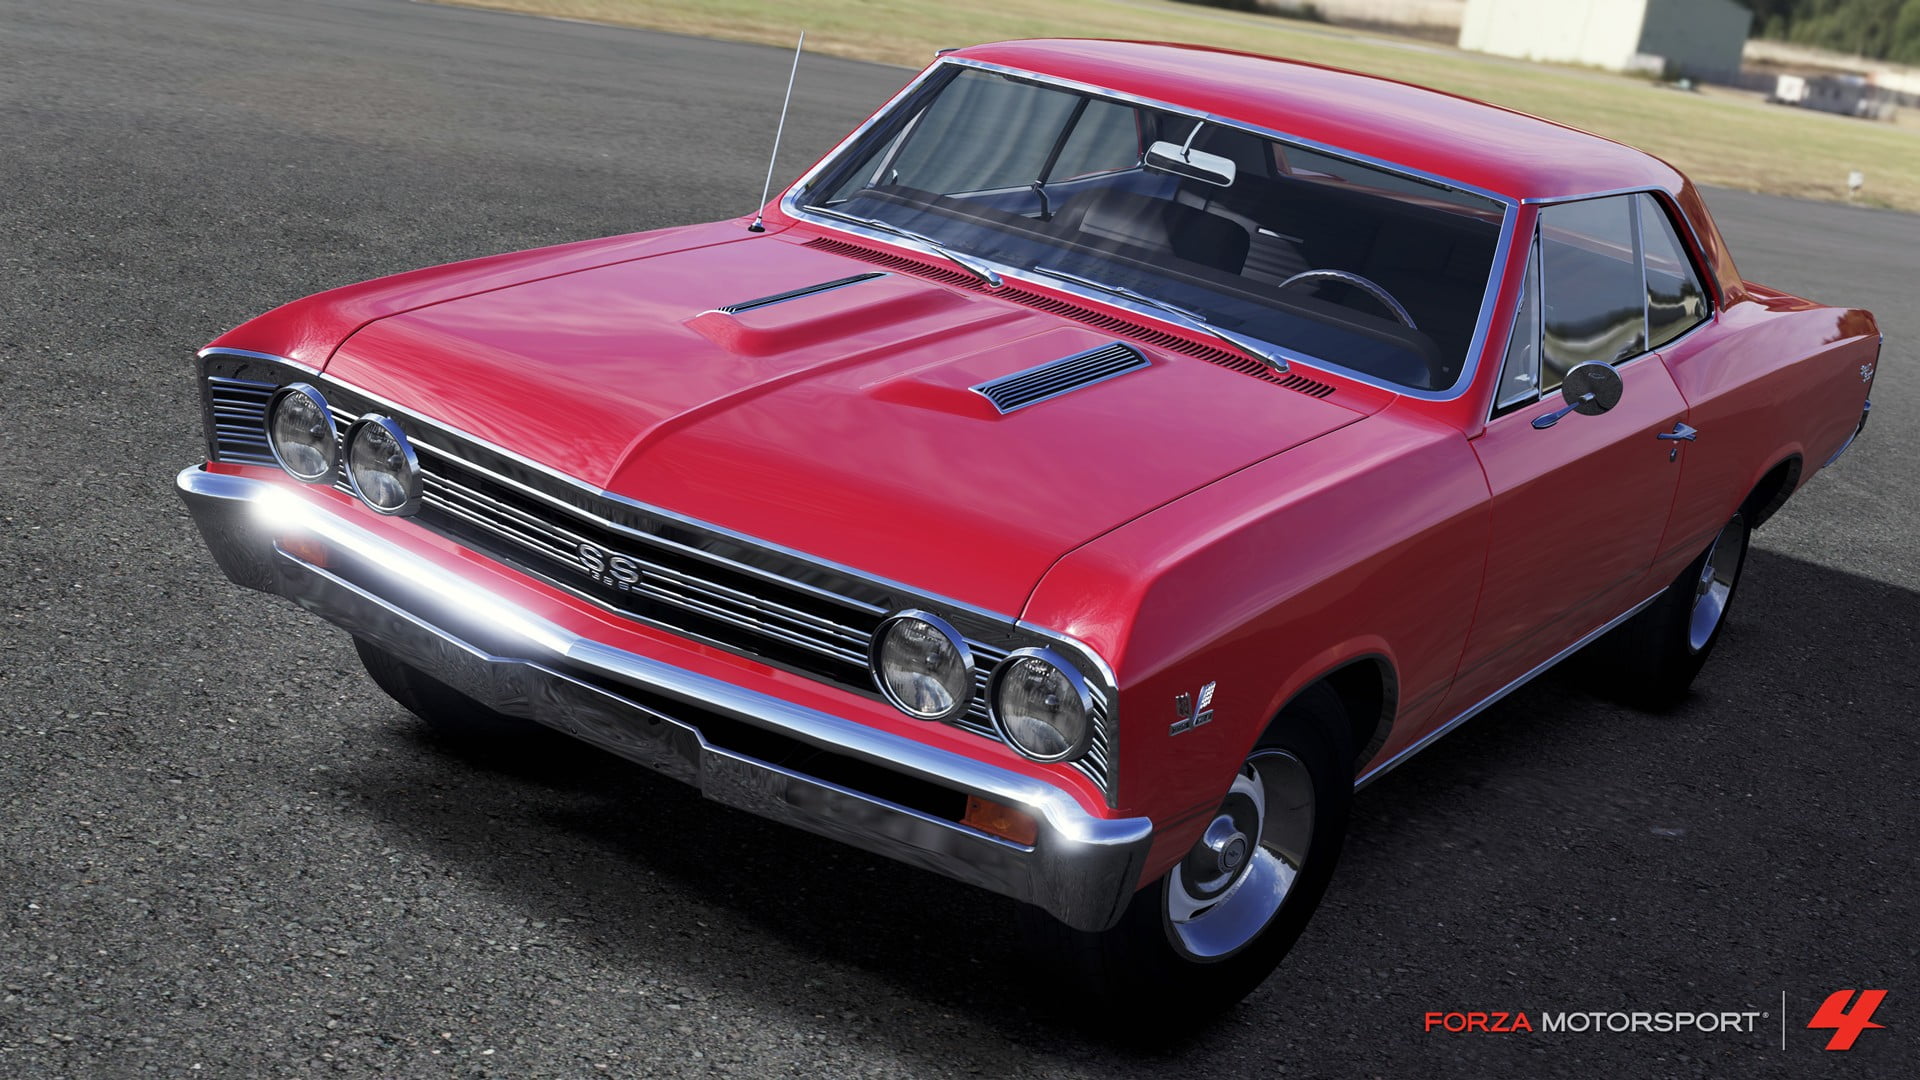 red muscle car, Forza Motorsport 4, video games, land vehicle